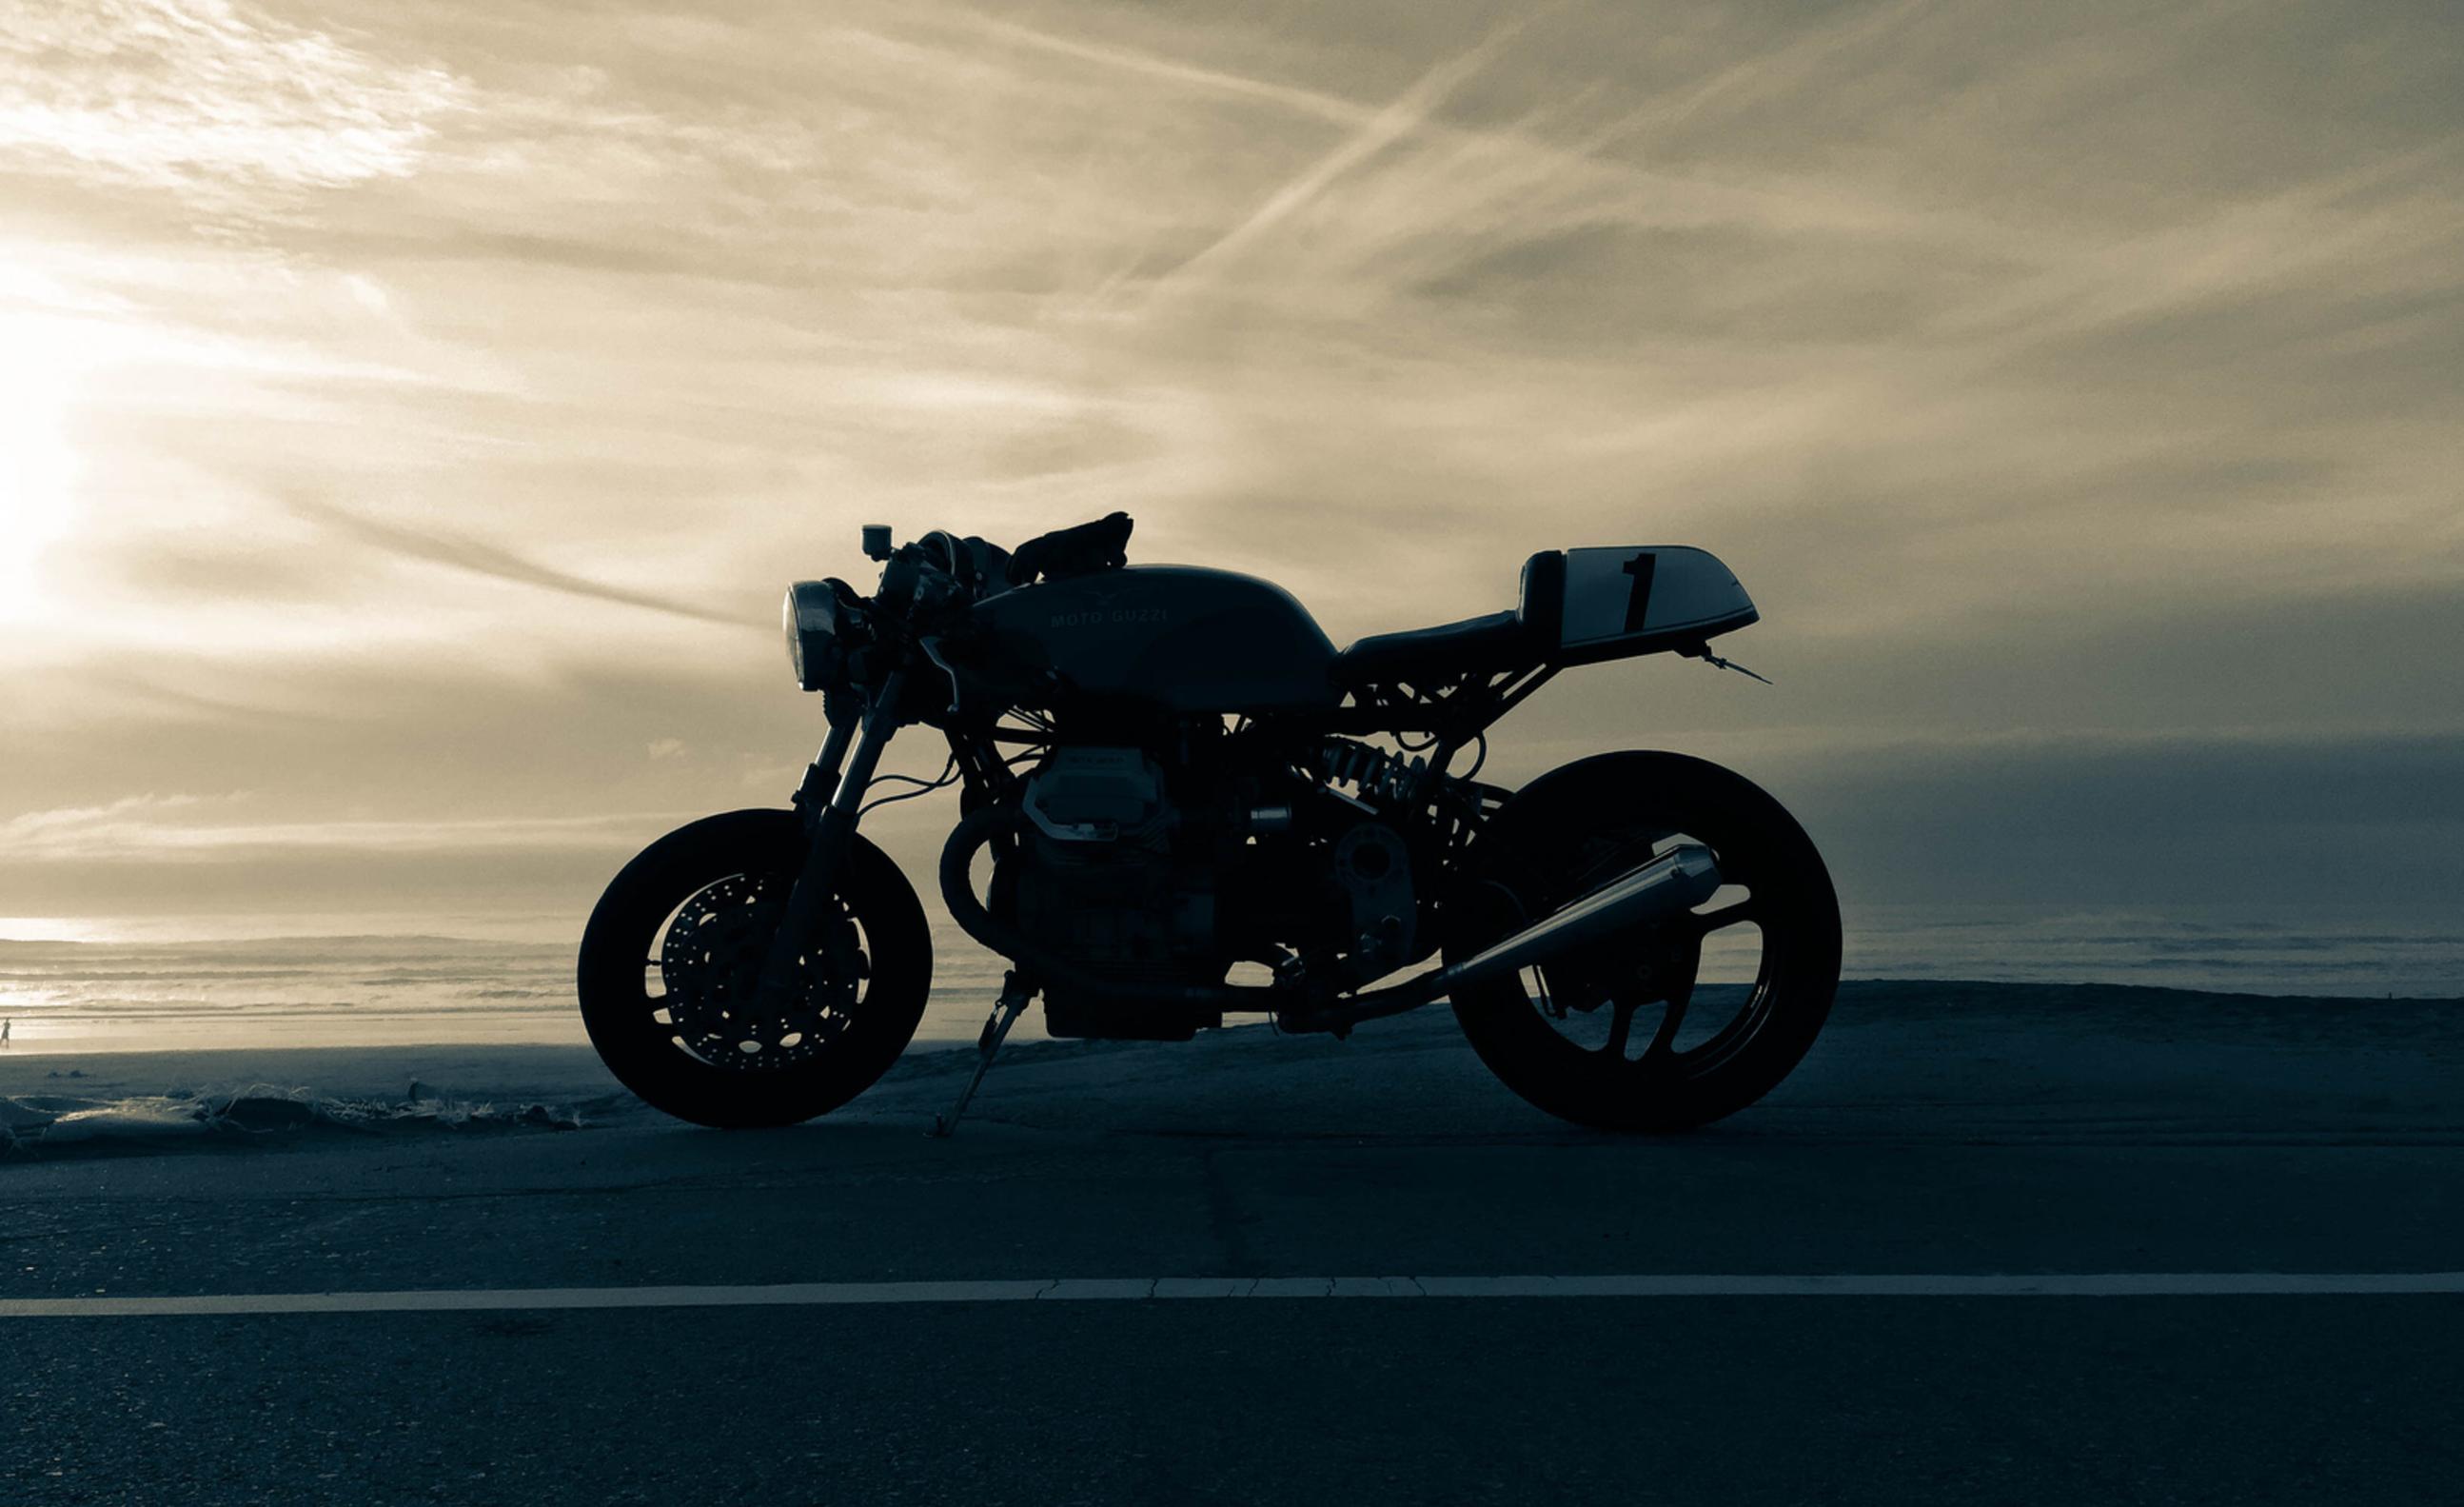 sunset contrast custom cafe racer motorcycle